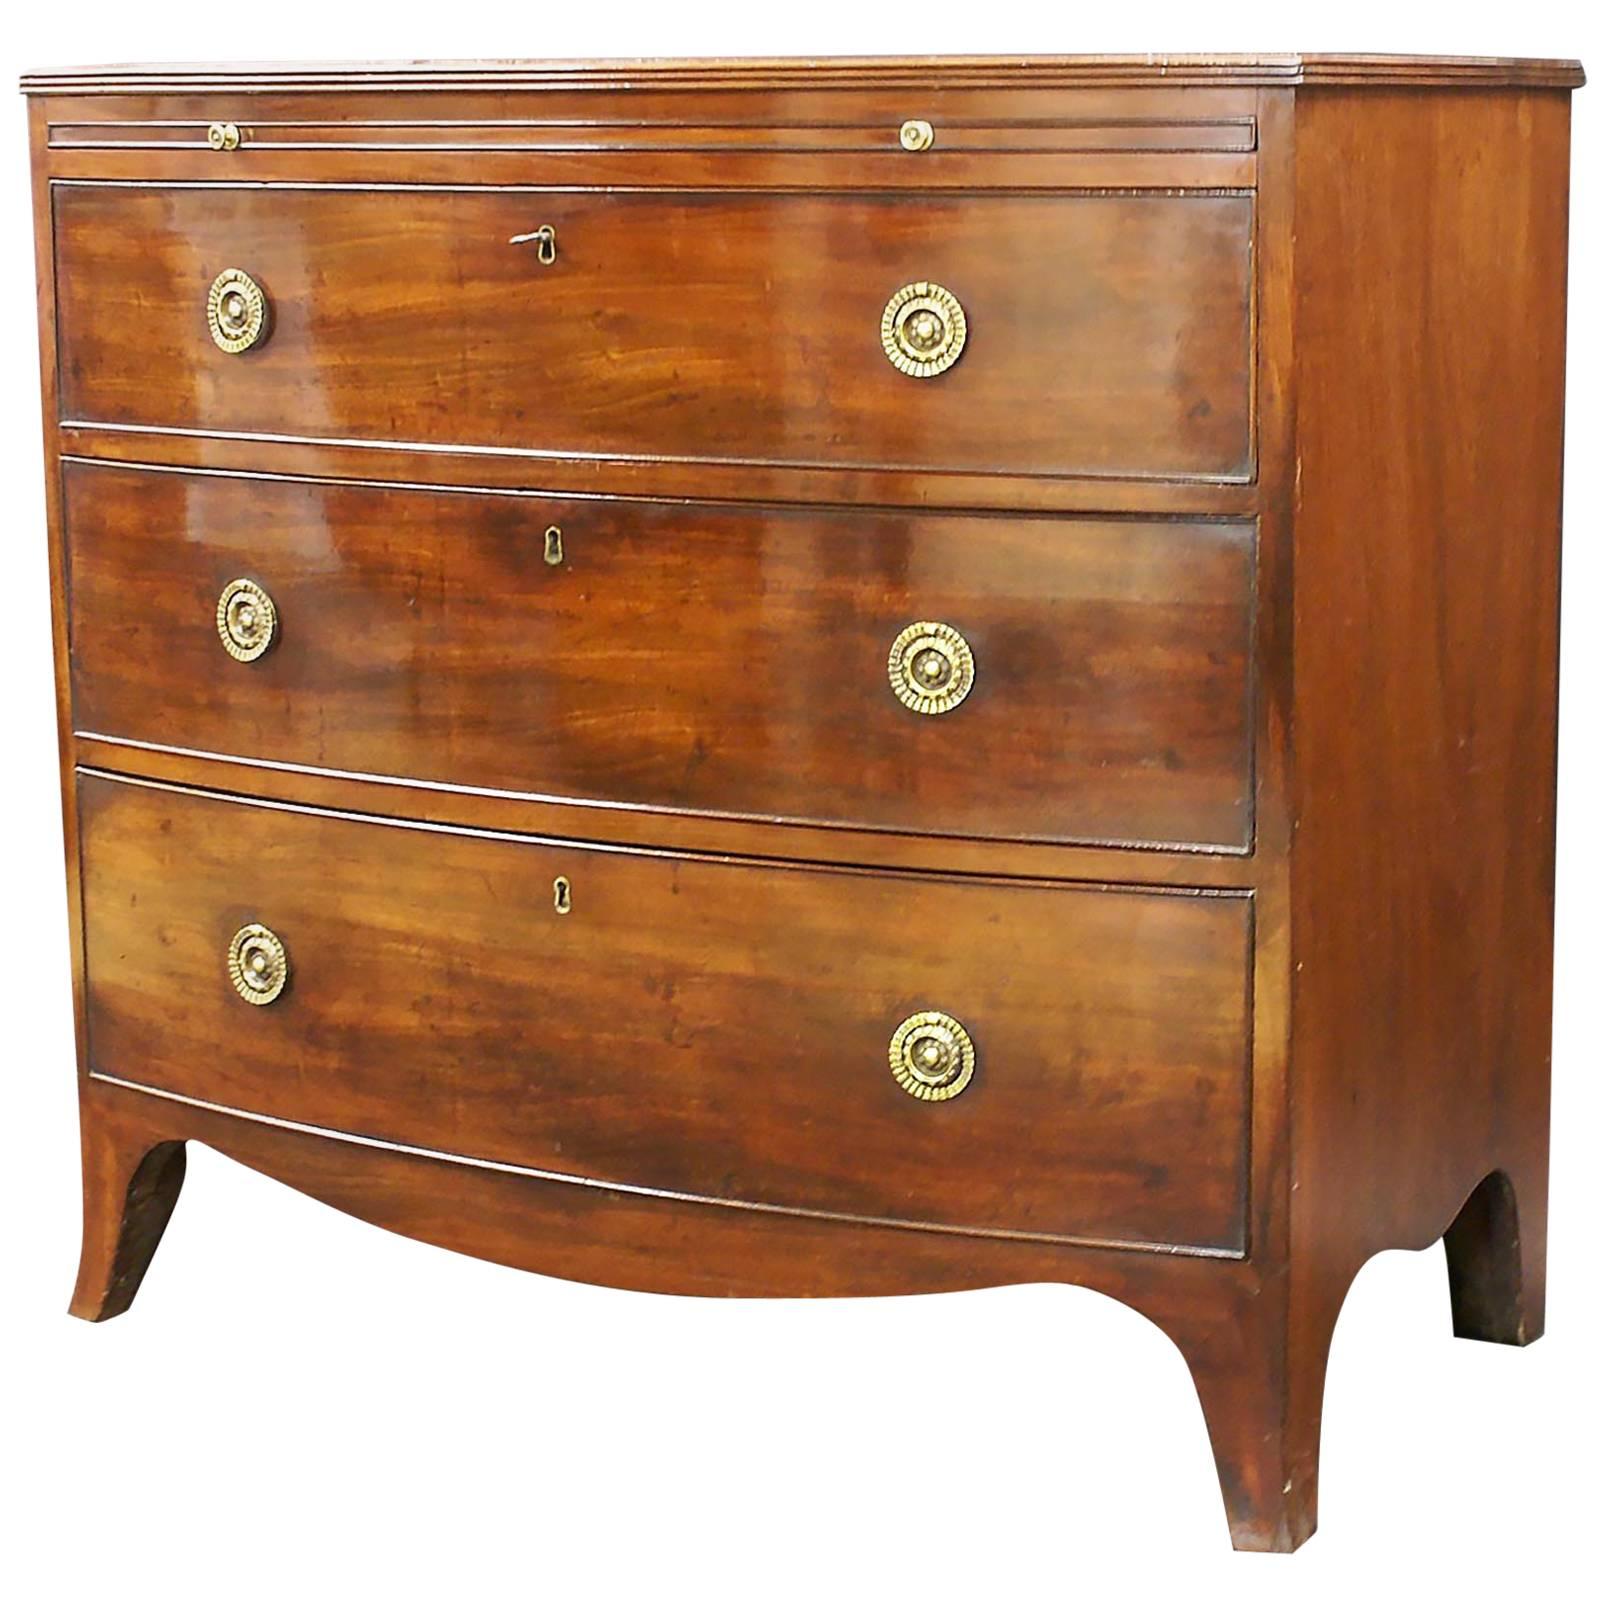 Early 19th Century Bow Fronted Chest of Three Drawers